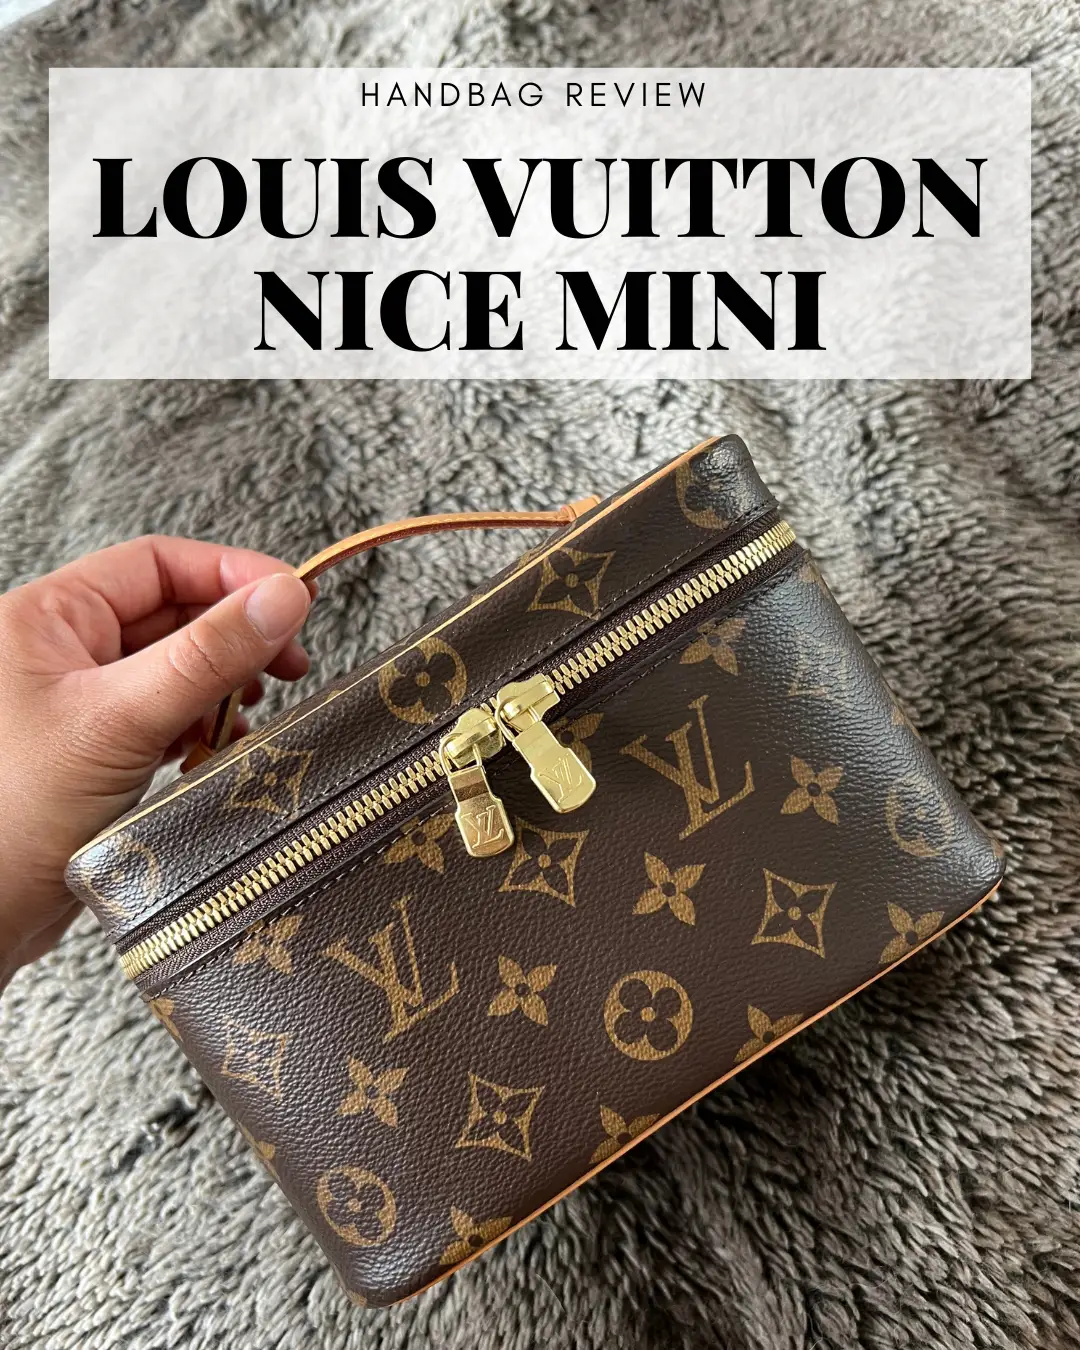 The cutest vanity from Louis Vuitton!